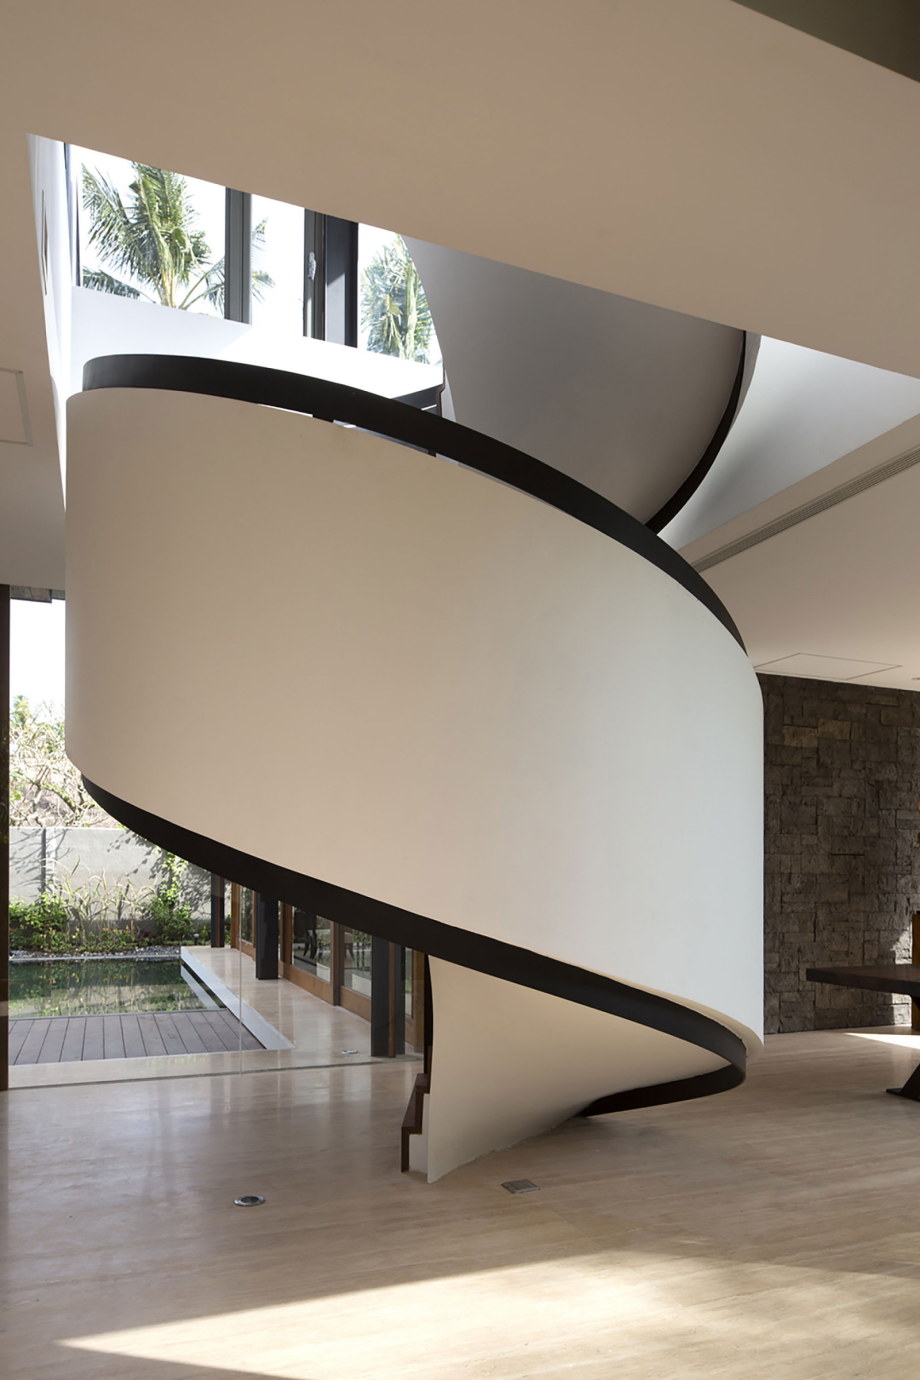 The sophisticated and elegant design of the Svarga Residence in Bali, Indonesia 13